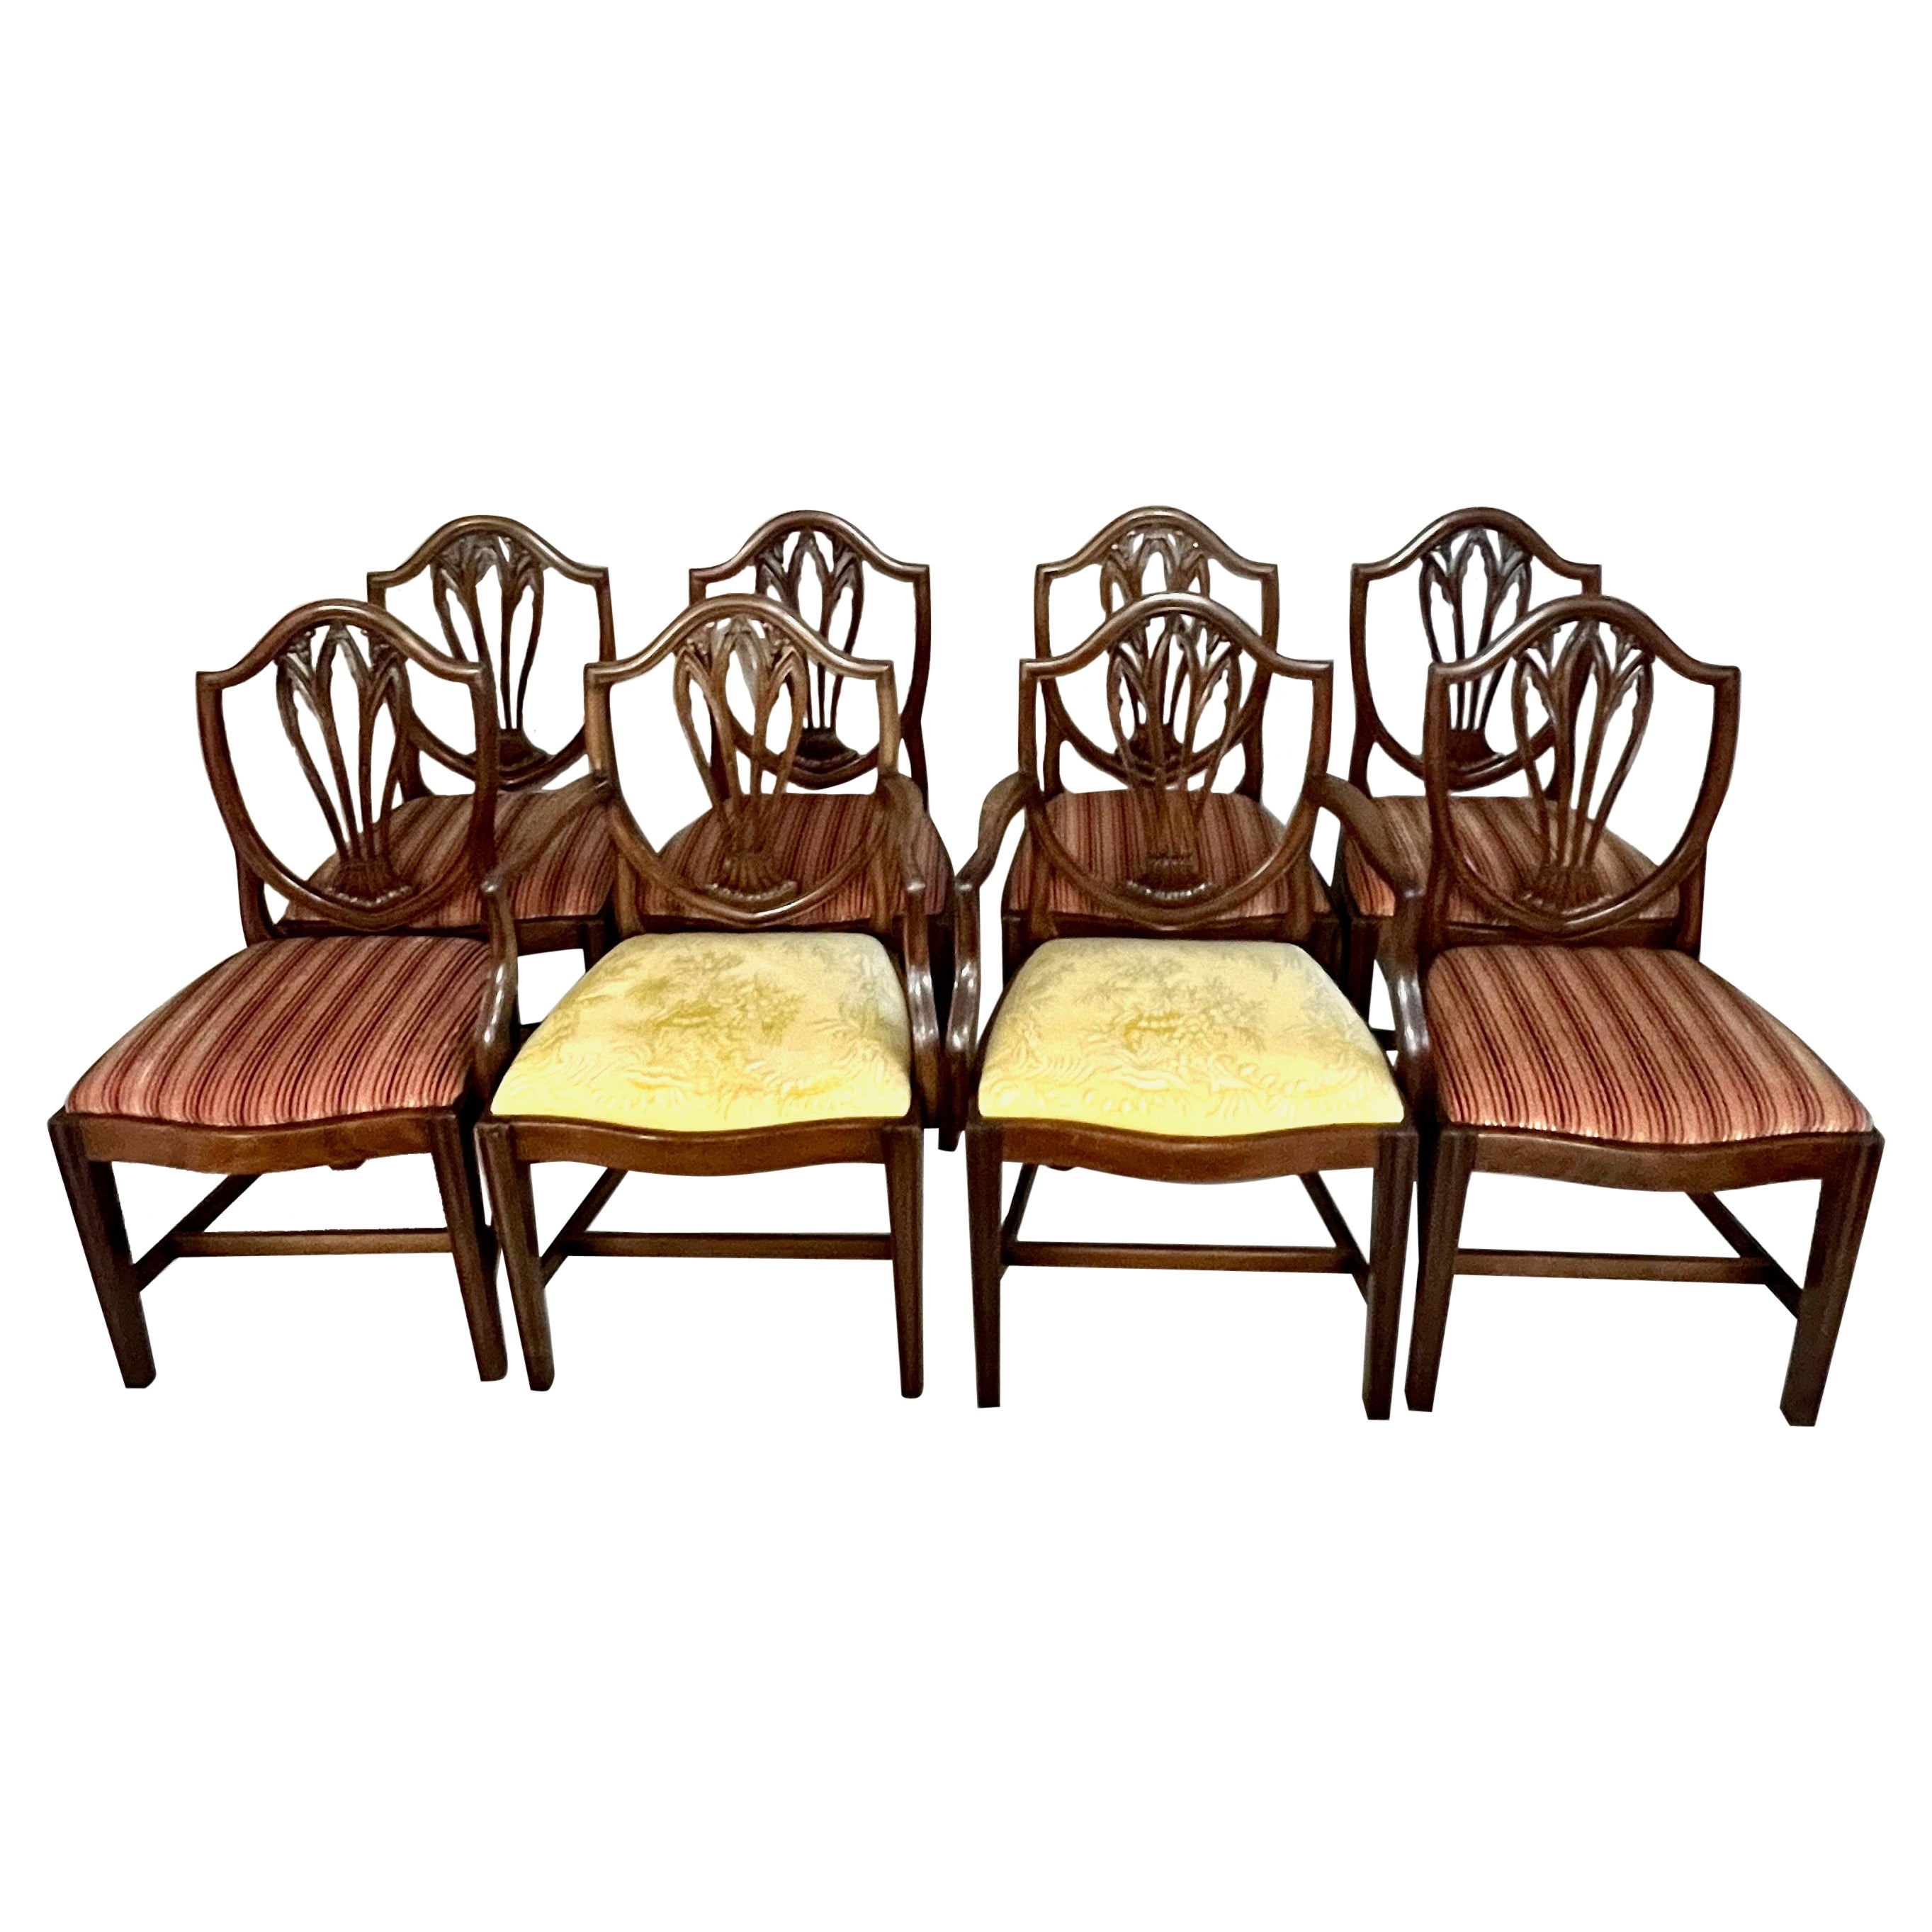 This is a superb set of assembled George III Dining Chairs after a model by George Hepplewhite. The two arm chairs and four of the side chairs date to the late 18th century. Two of the side chairs are of a later date. All eight chairs are in very